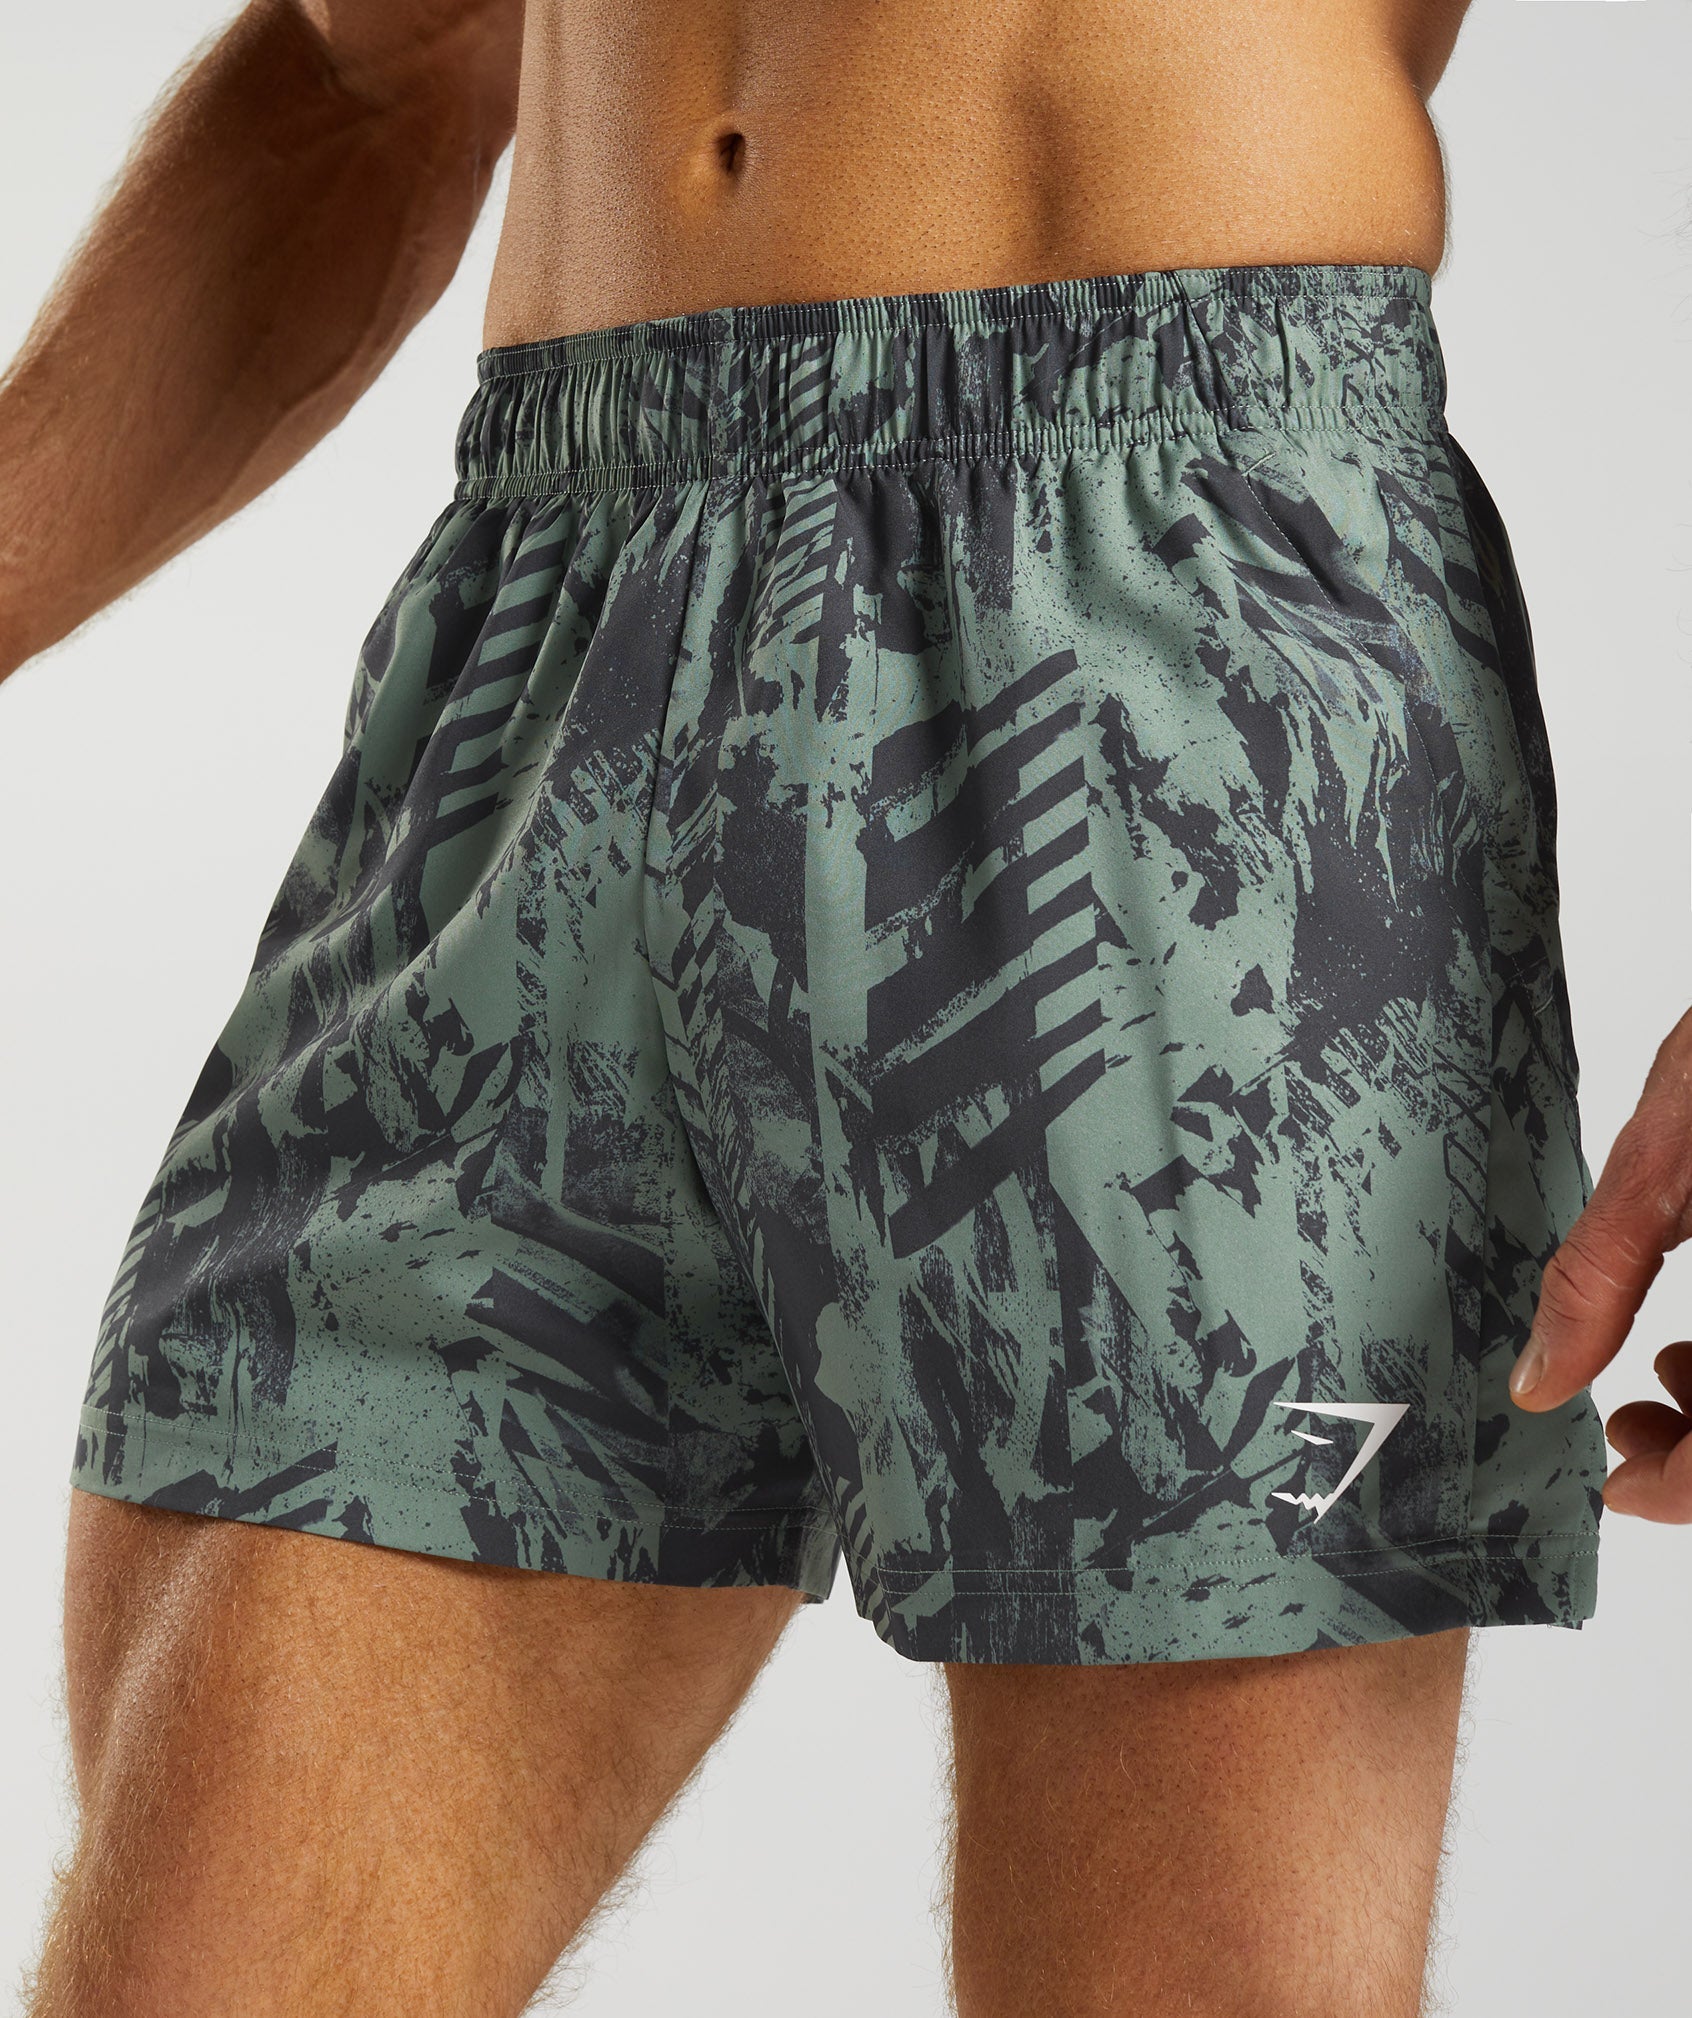 Sport 5" Shorts in Willow Green Print - view 5